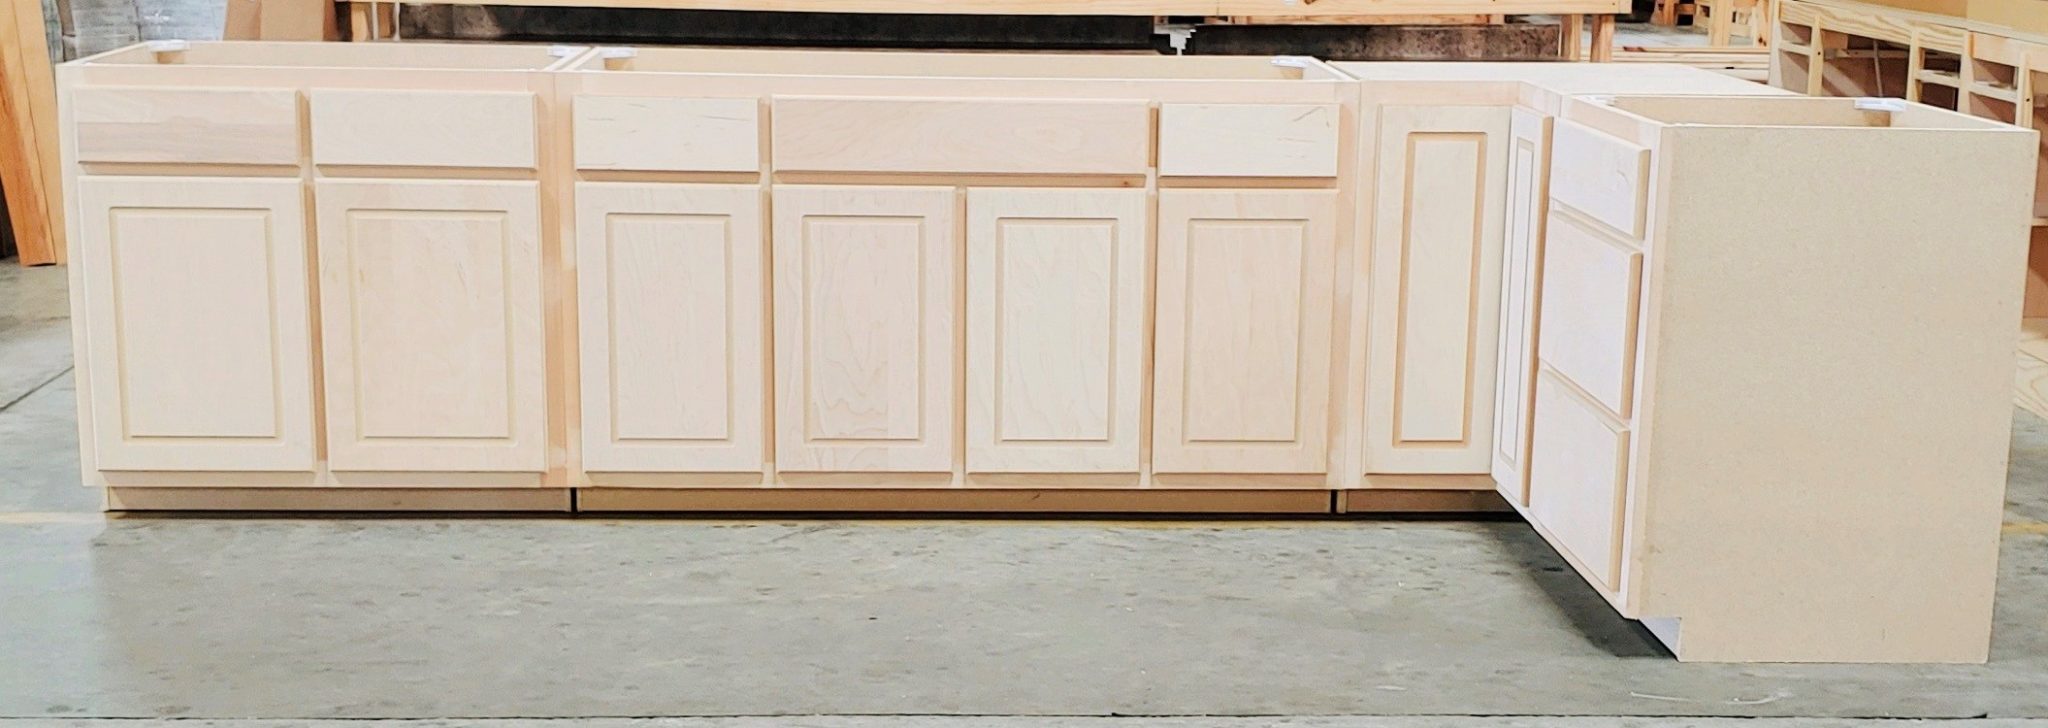 tall unfinished kitchen wall cabinet